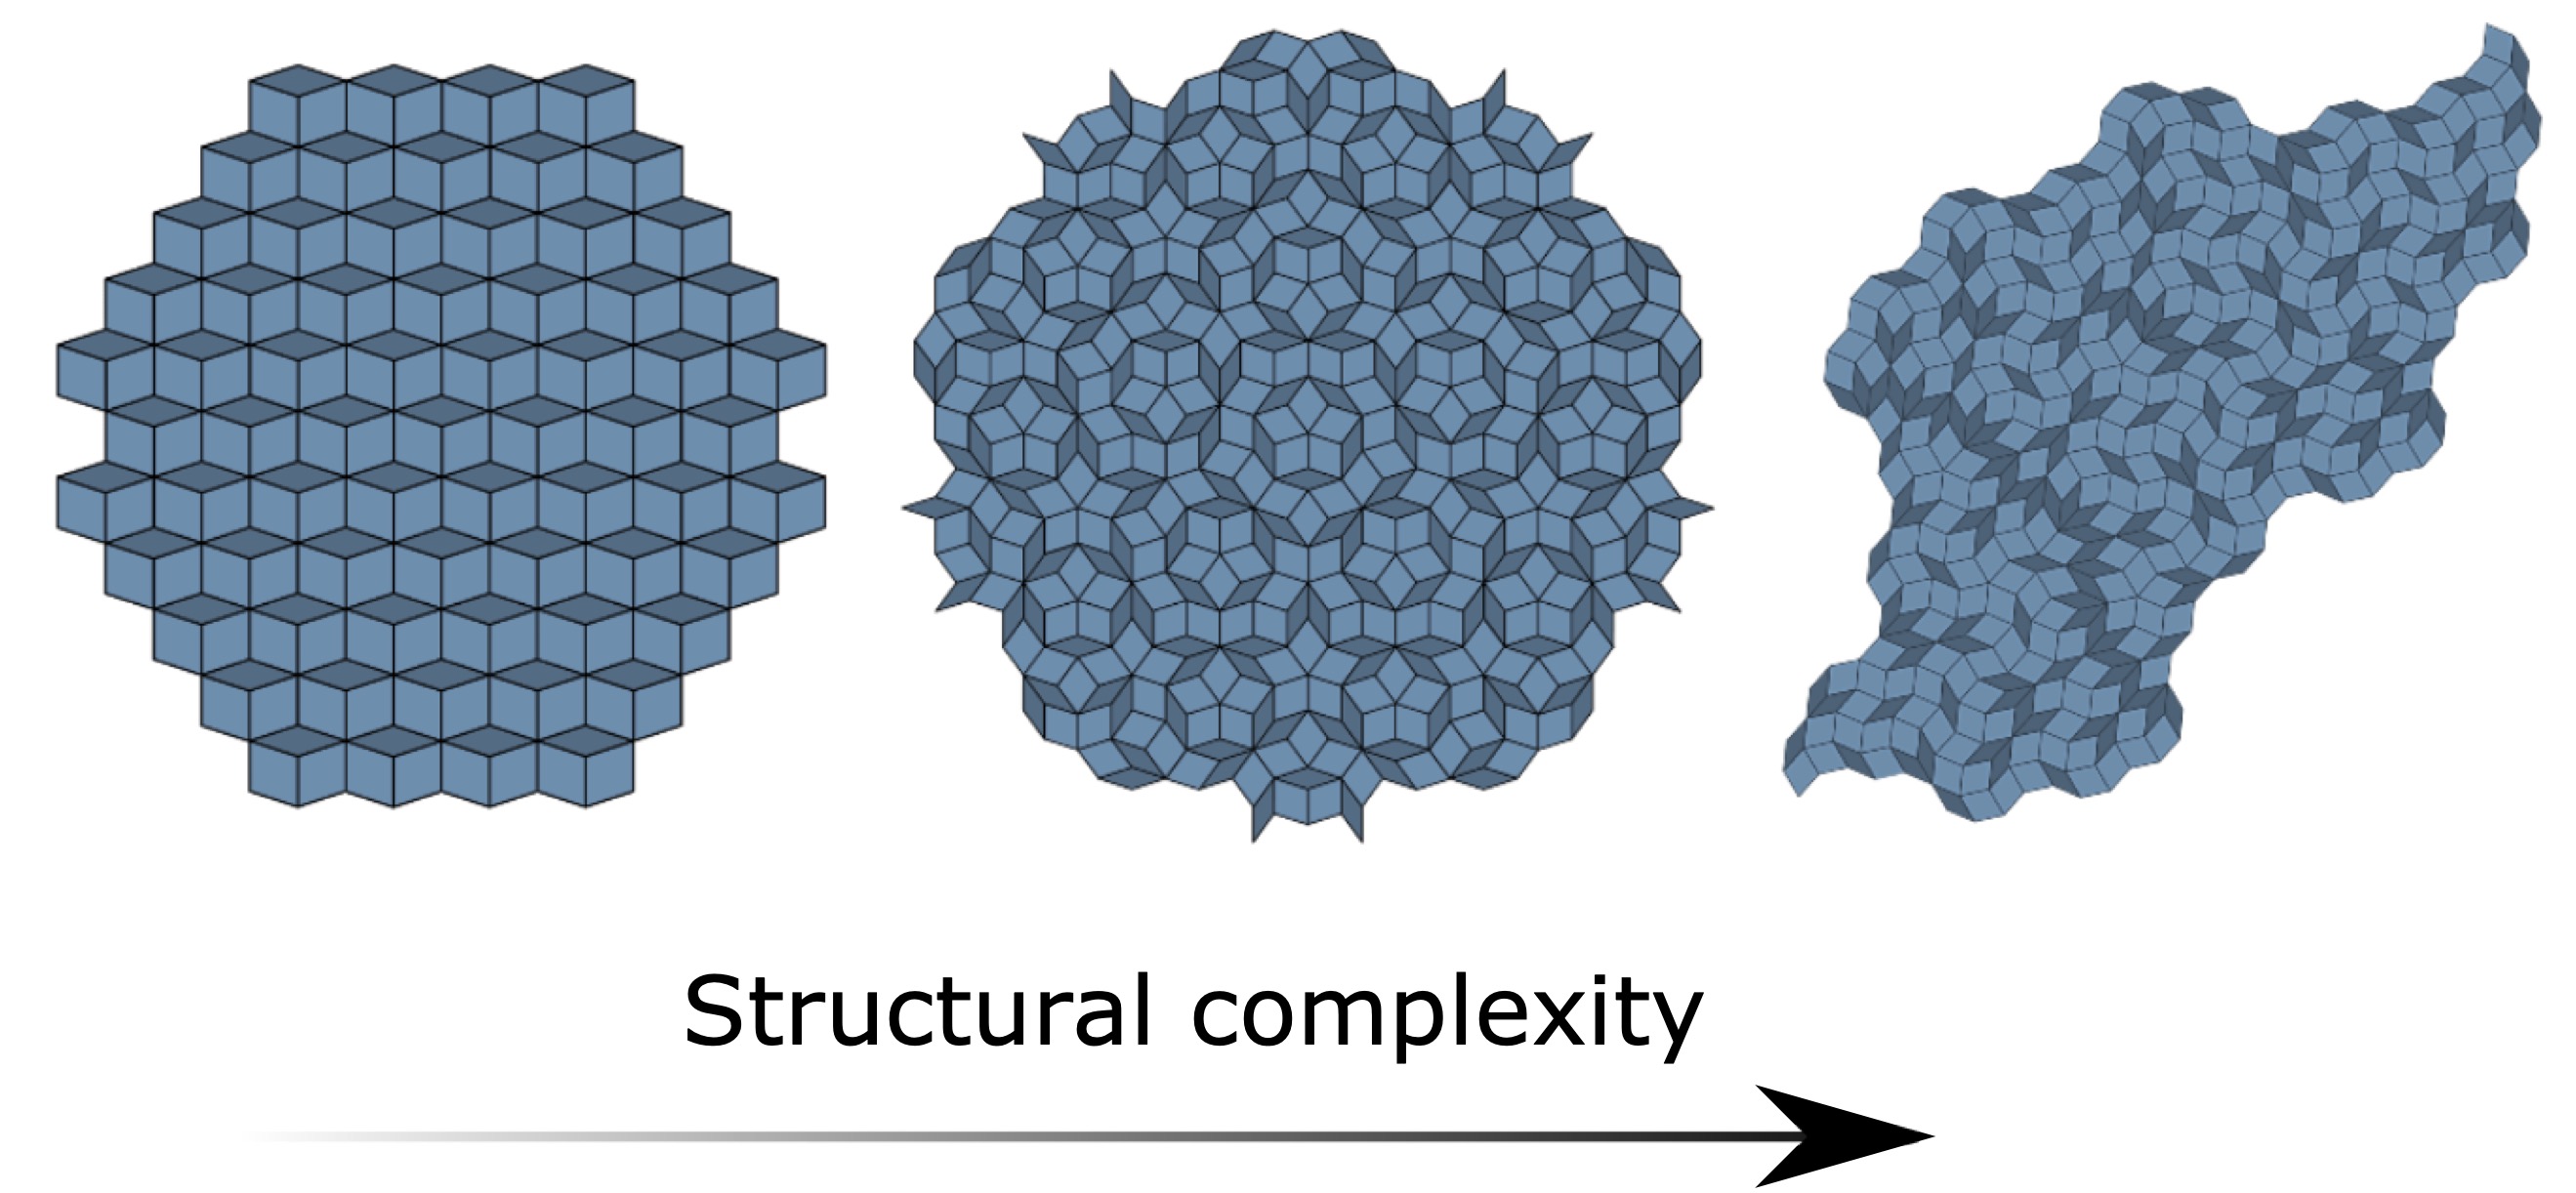 Structurally complex materials